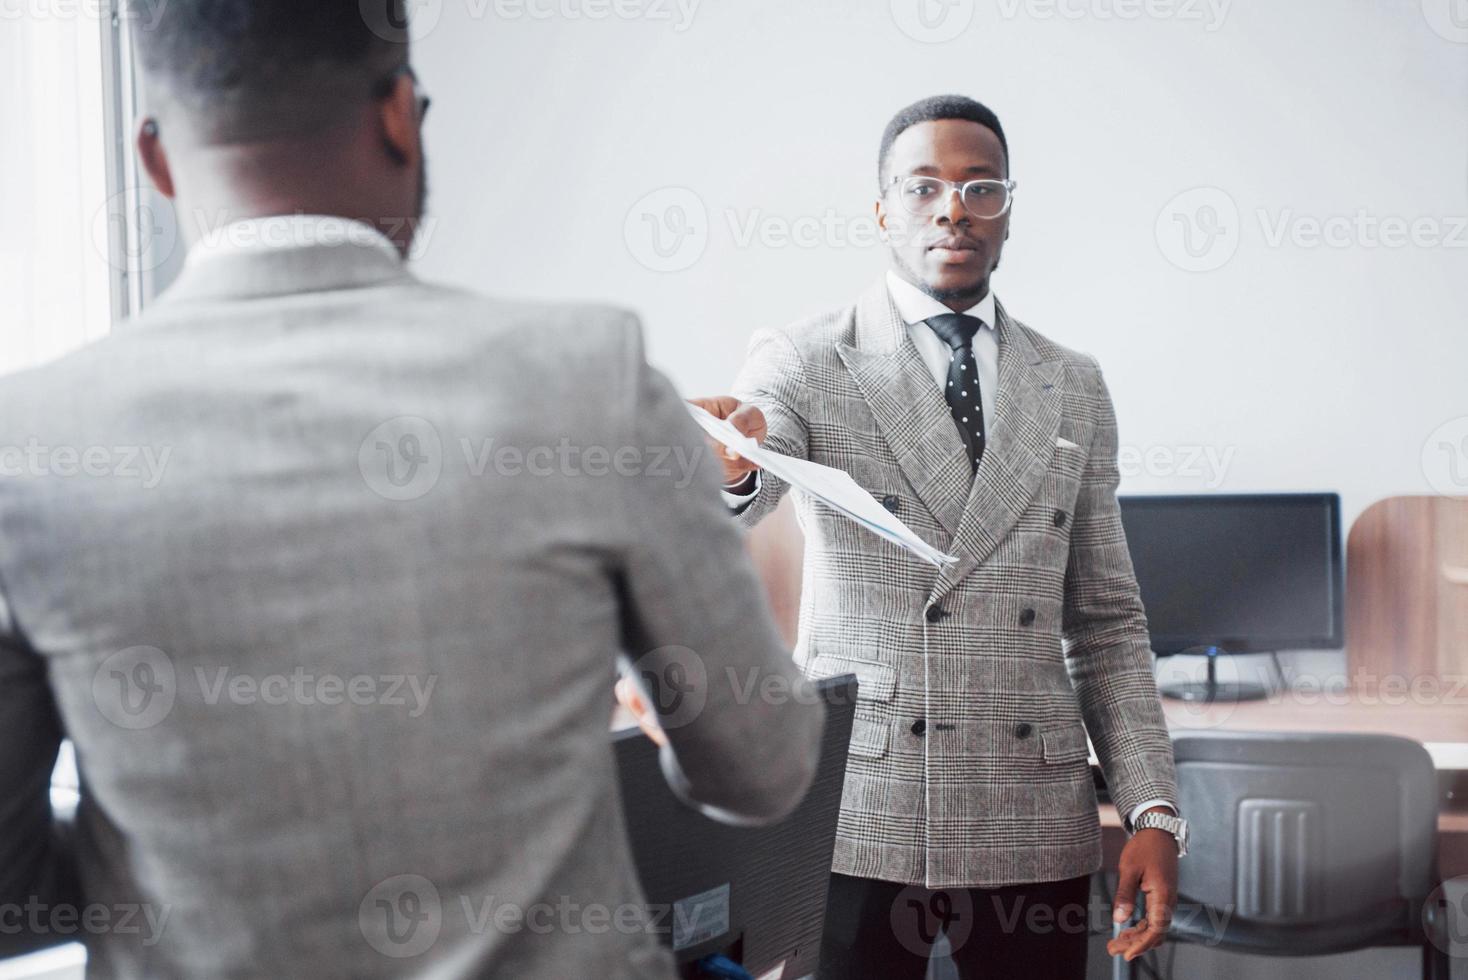 Discussing a project. Two black business people in formalwear discussing something while one of them pointing a paper photo